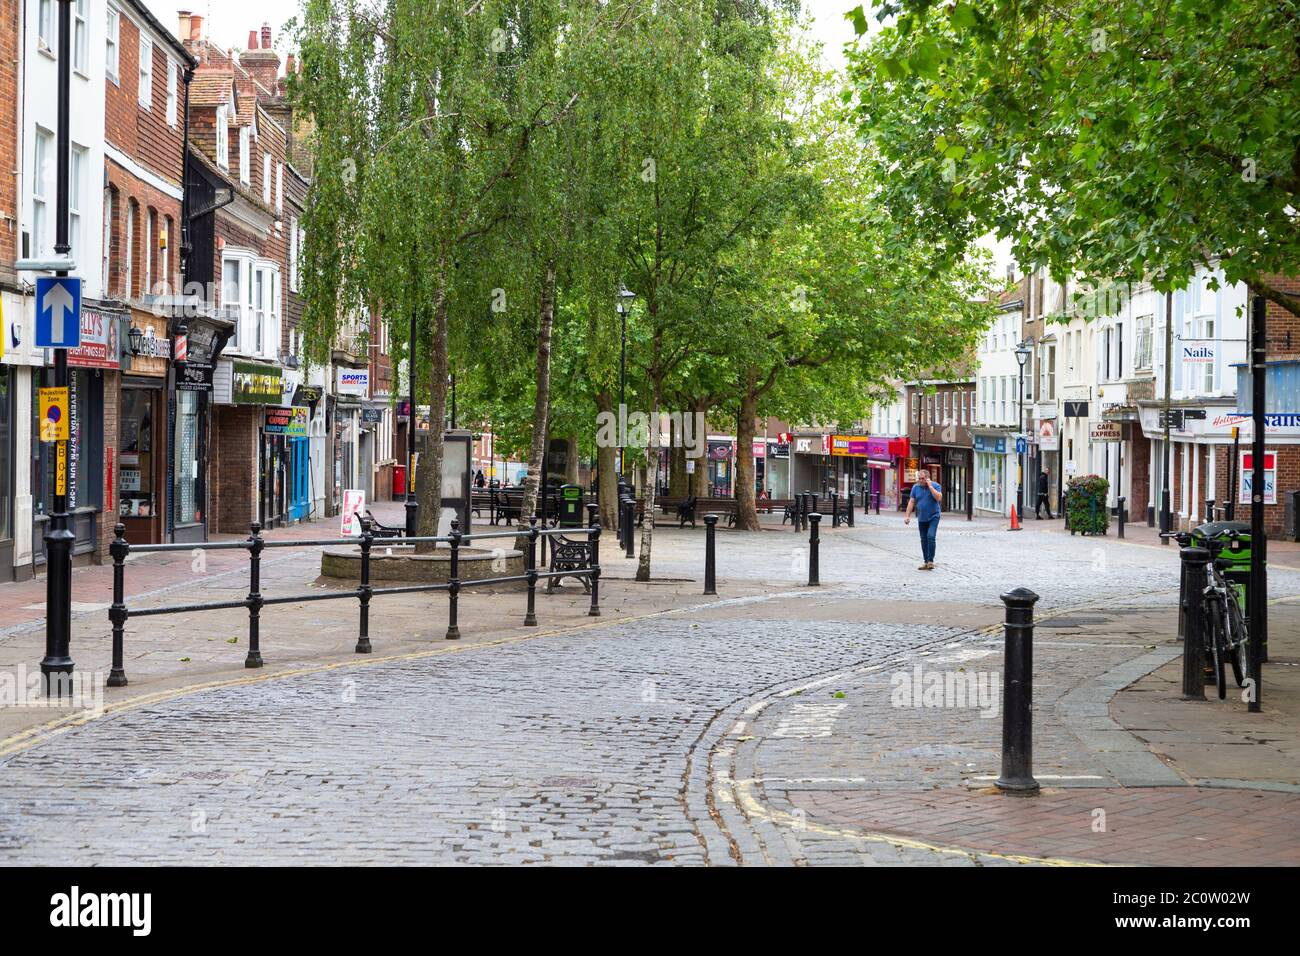 Ashford, Kent, UK. 12th Jun, 2020. With the impending opening of shops announced by the government from Monday, Ashford city centre appears to be deserted with empty streets and very few signs of businesses about to reopen. Photo Credit: Paul Lawrenson/Alamy Live News Stock Photo